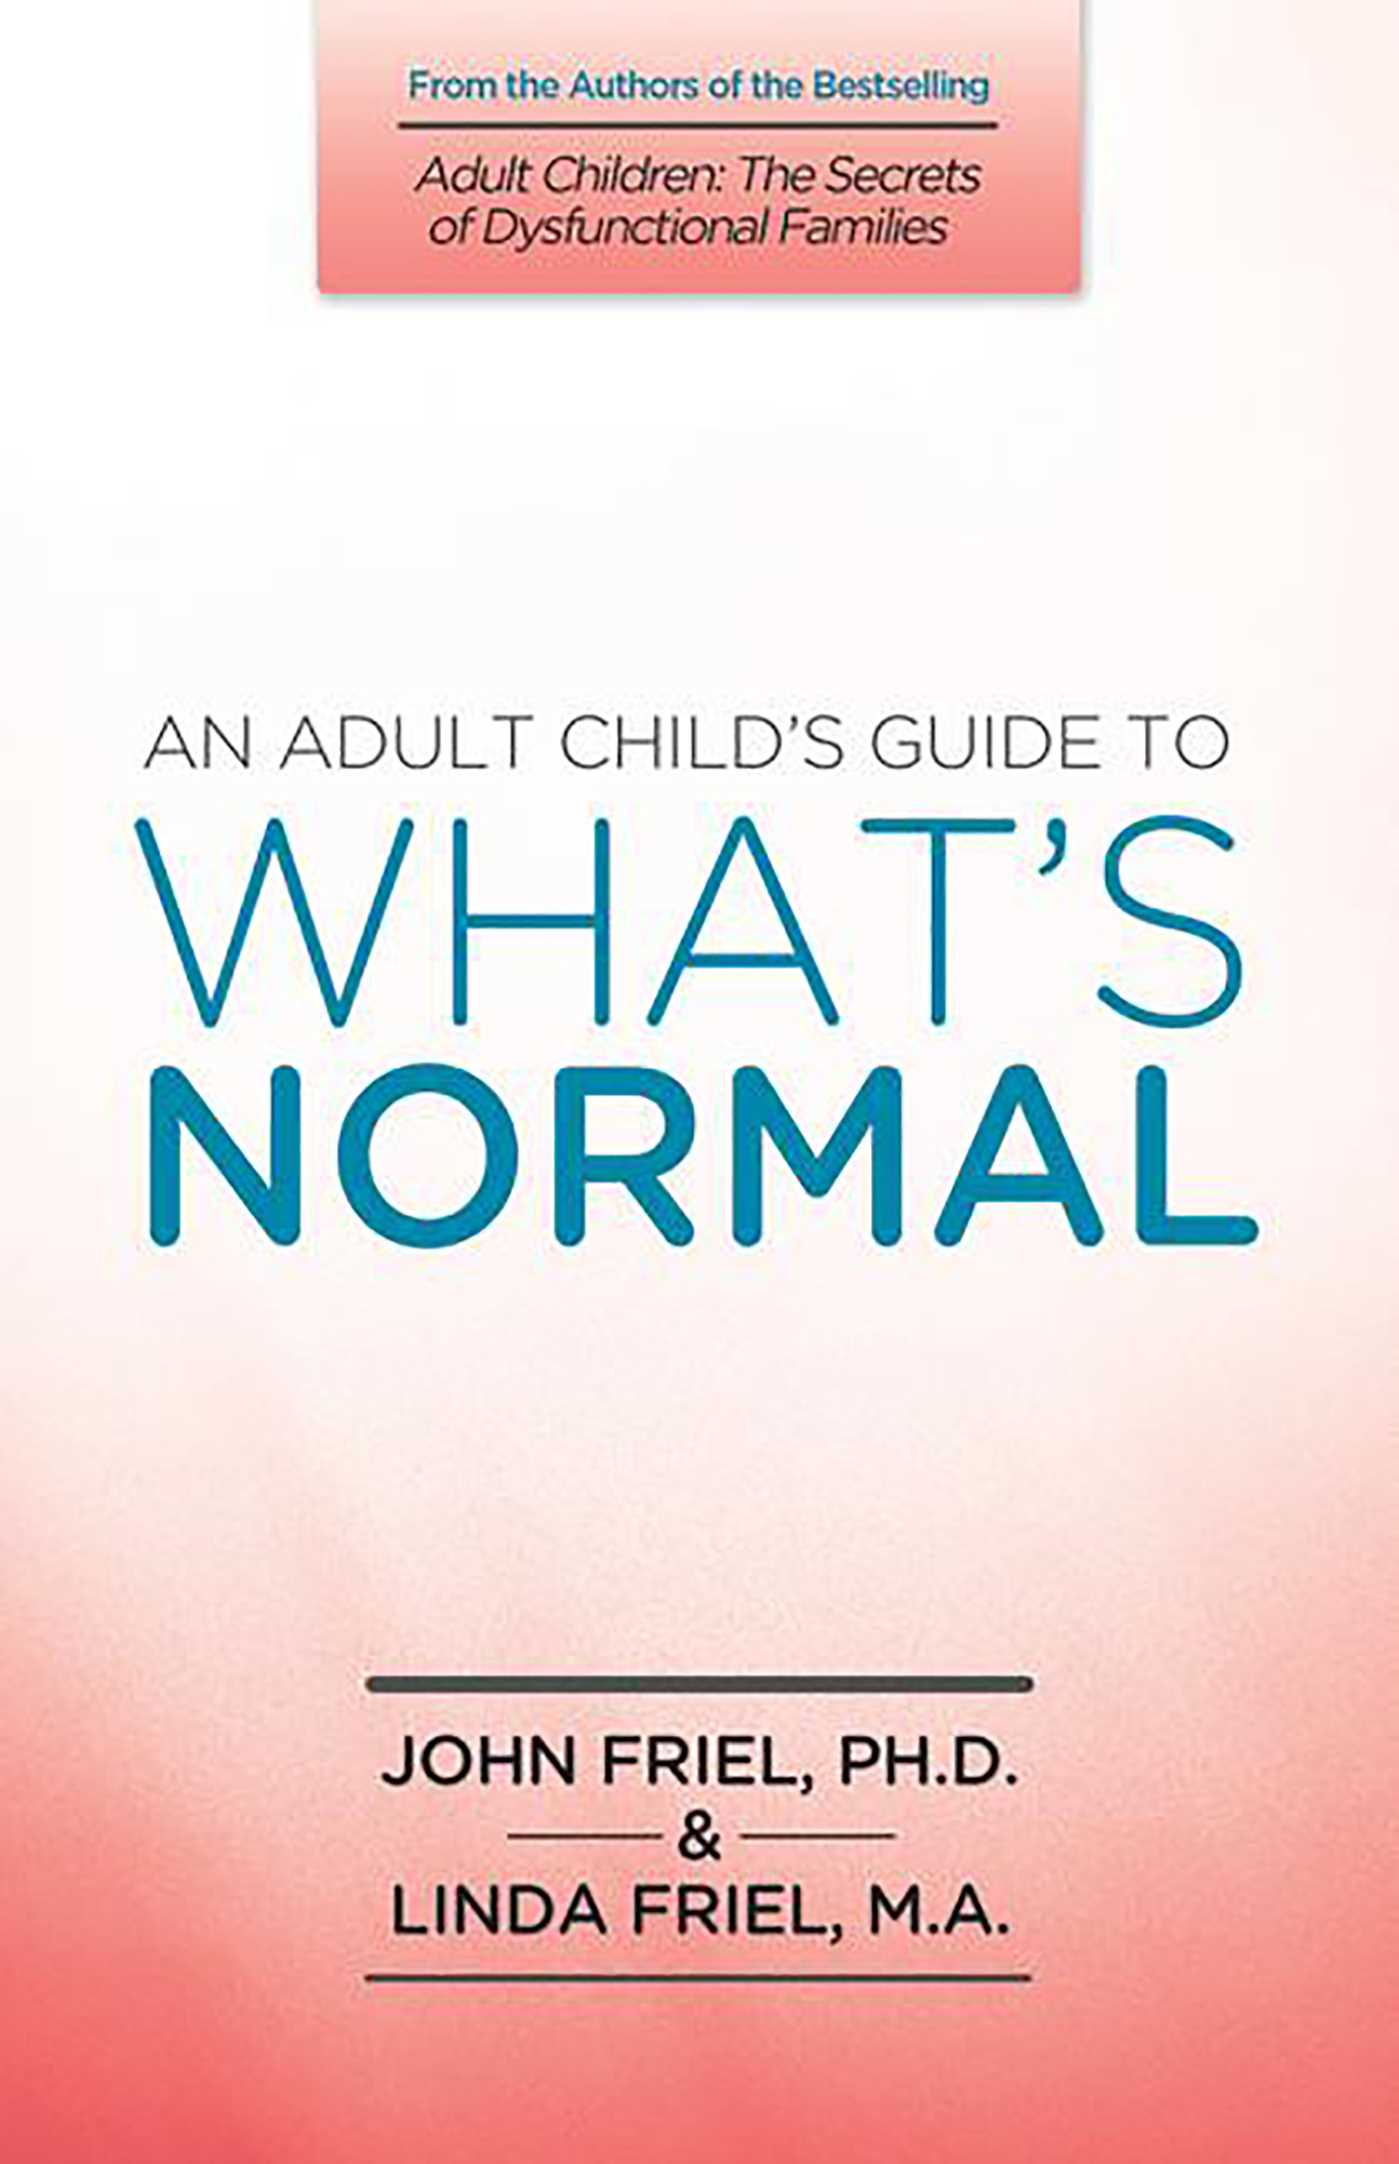 An Adult Child's Guide to What's Normal - 10-14.99